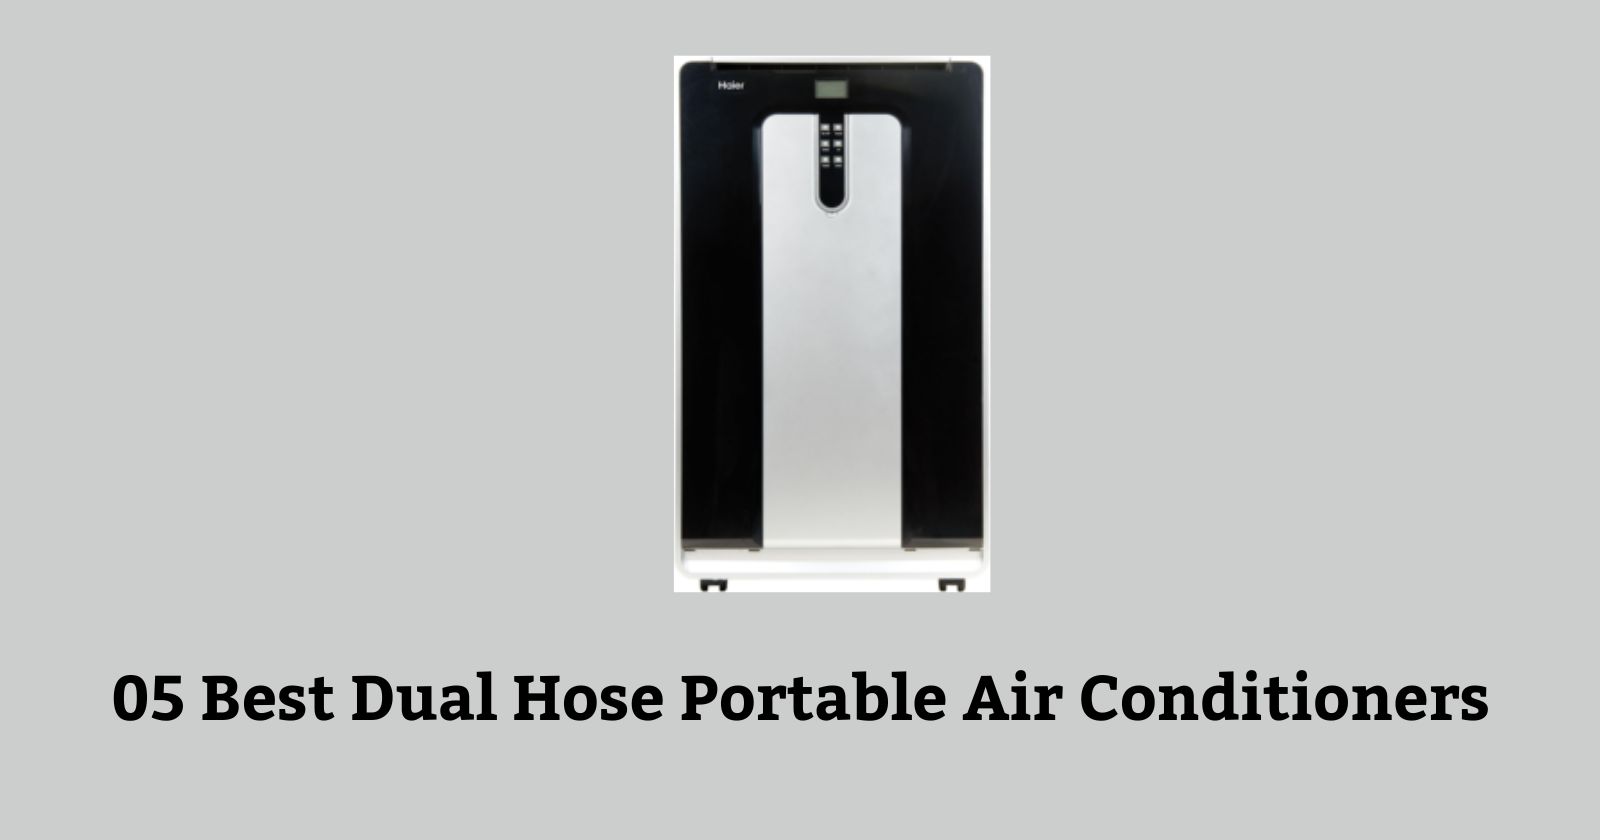 05 Best Dual Hose Portable Air Conditioners